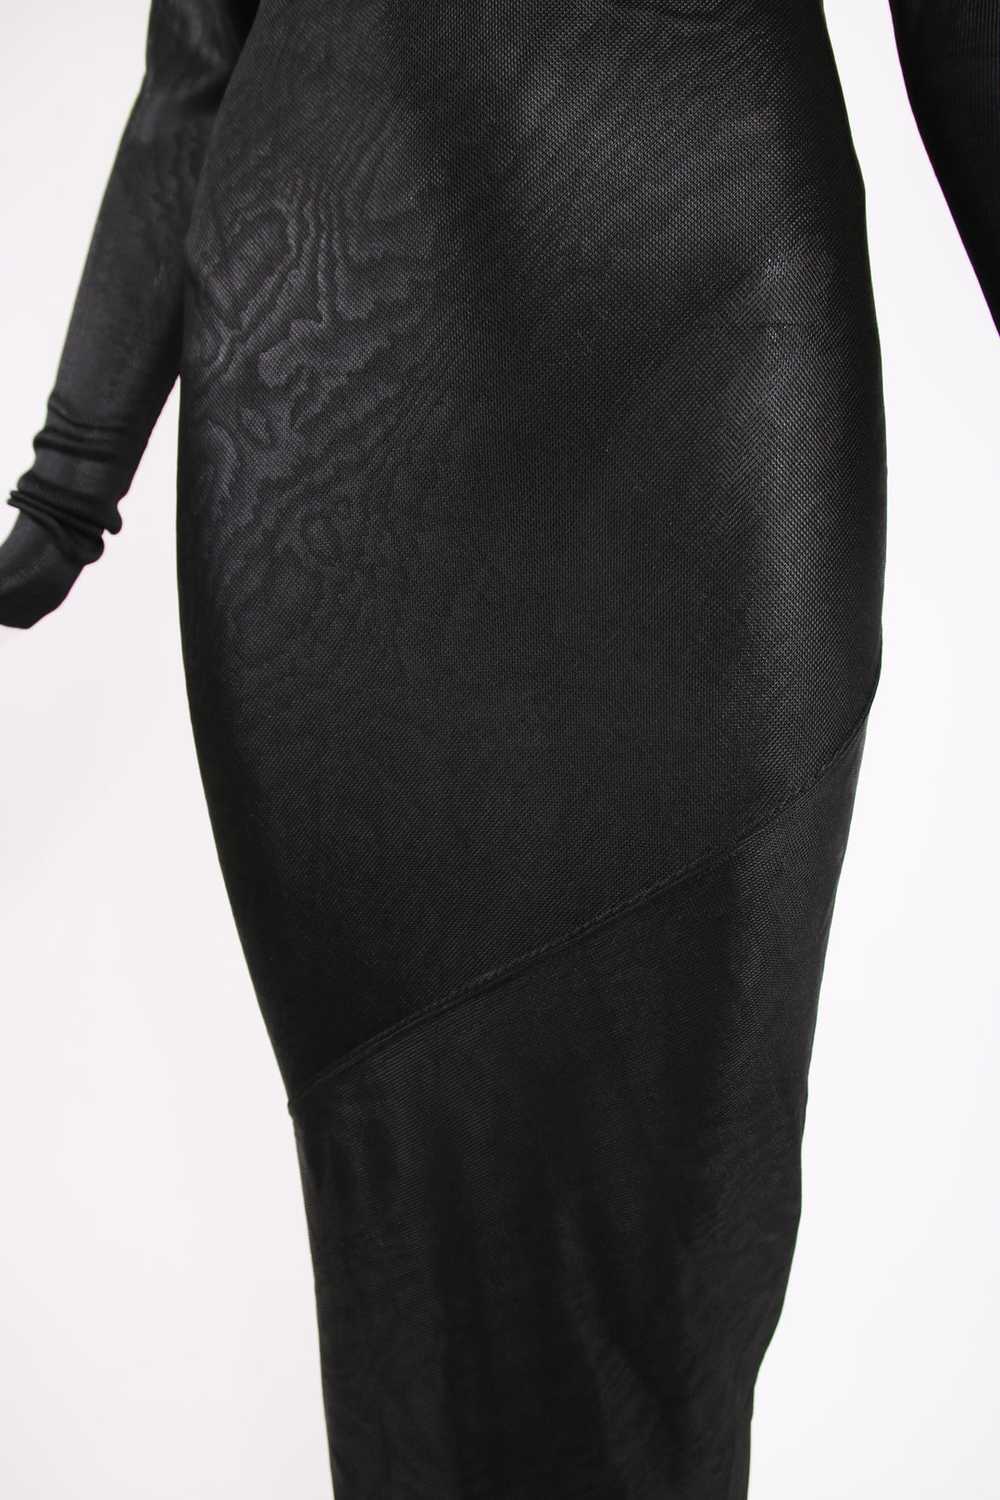 1986 Azzedine Alaia Black Trained Gown - image 4